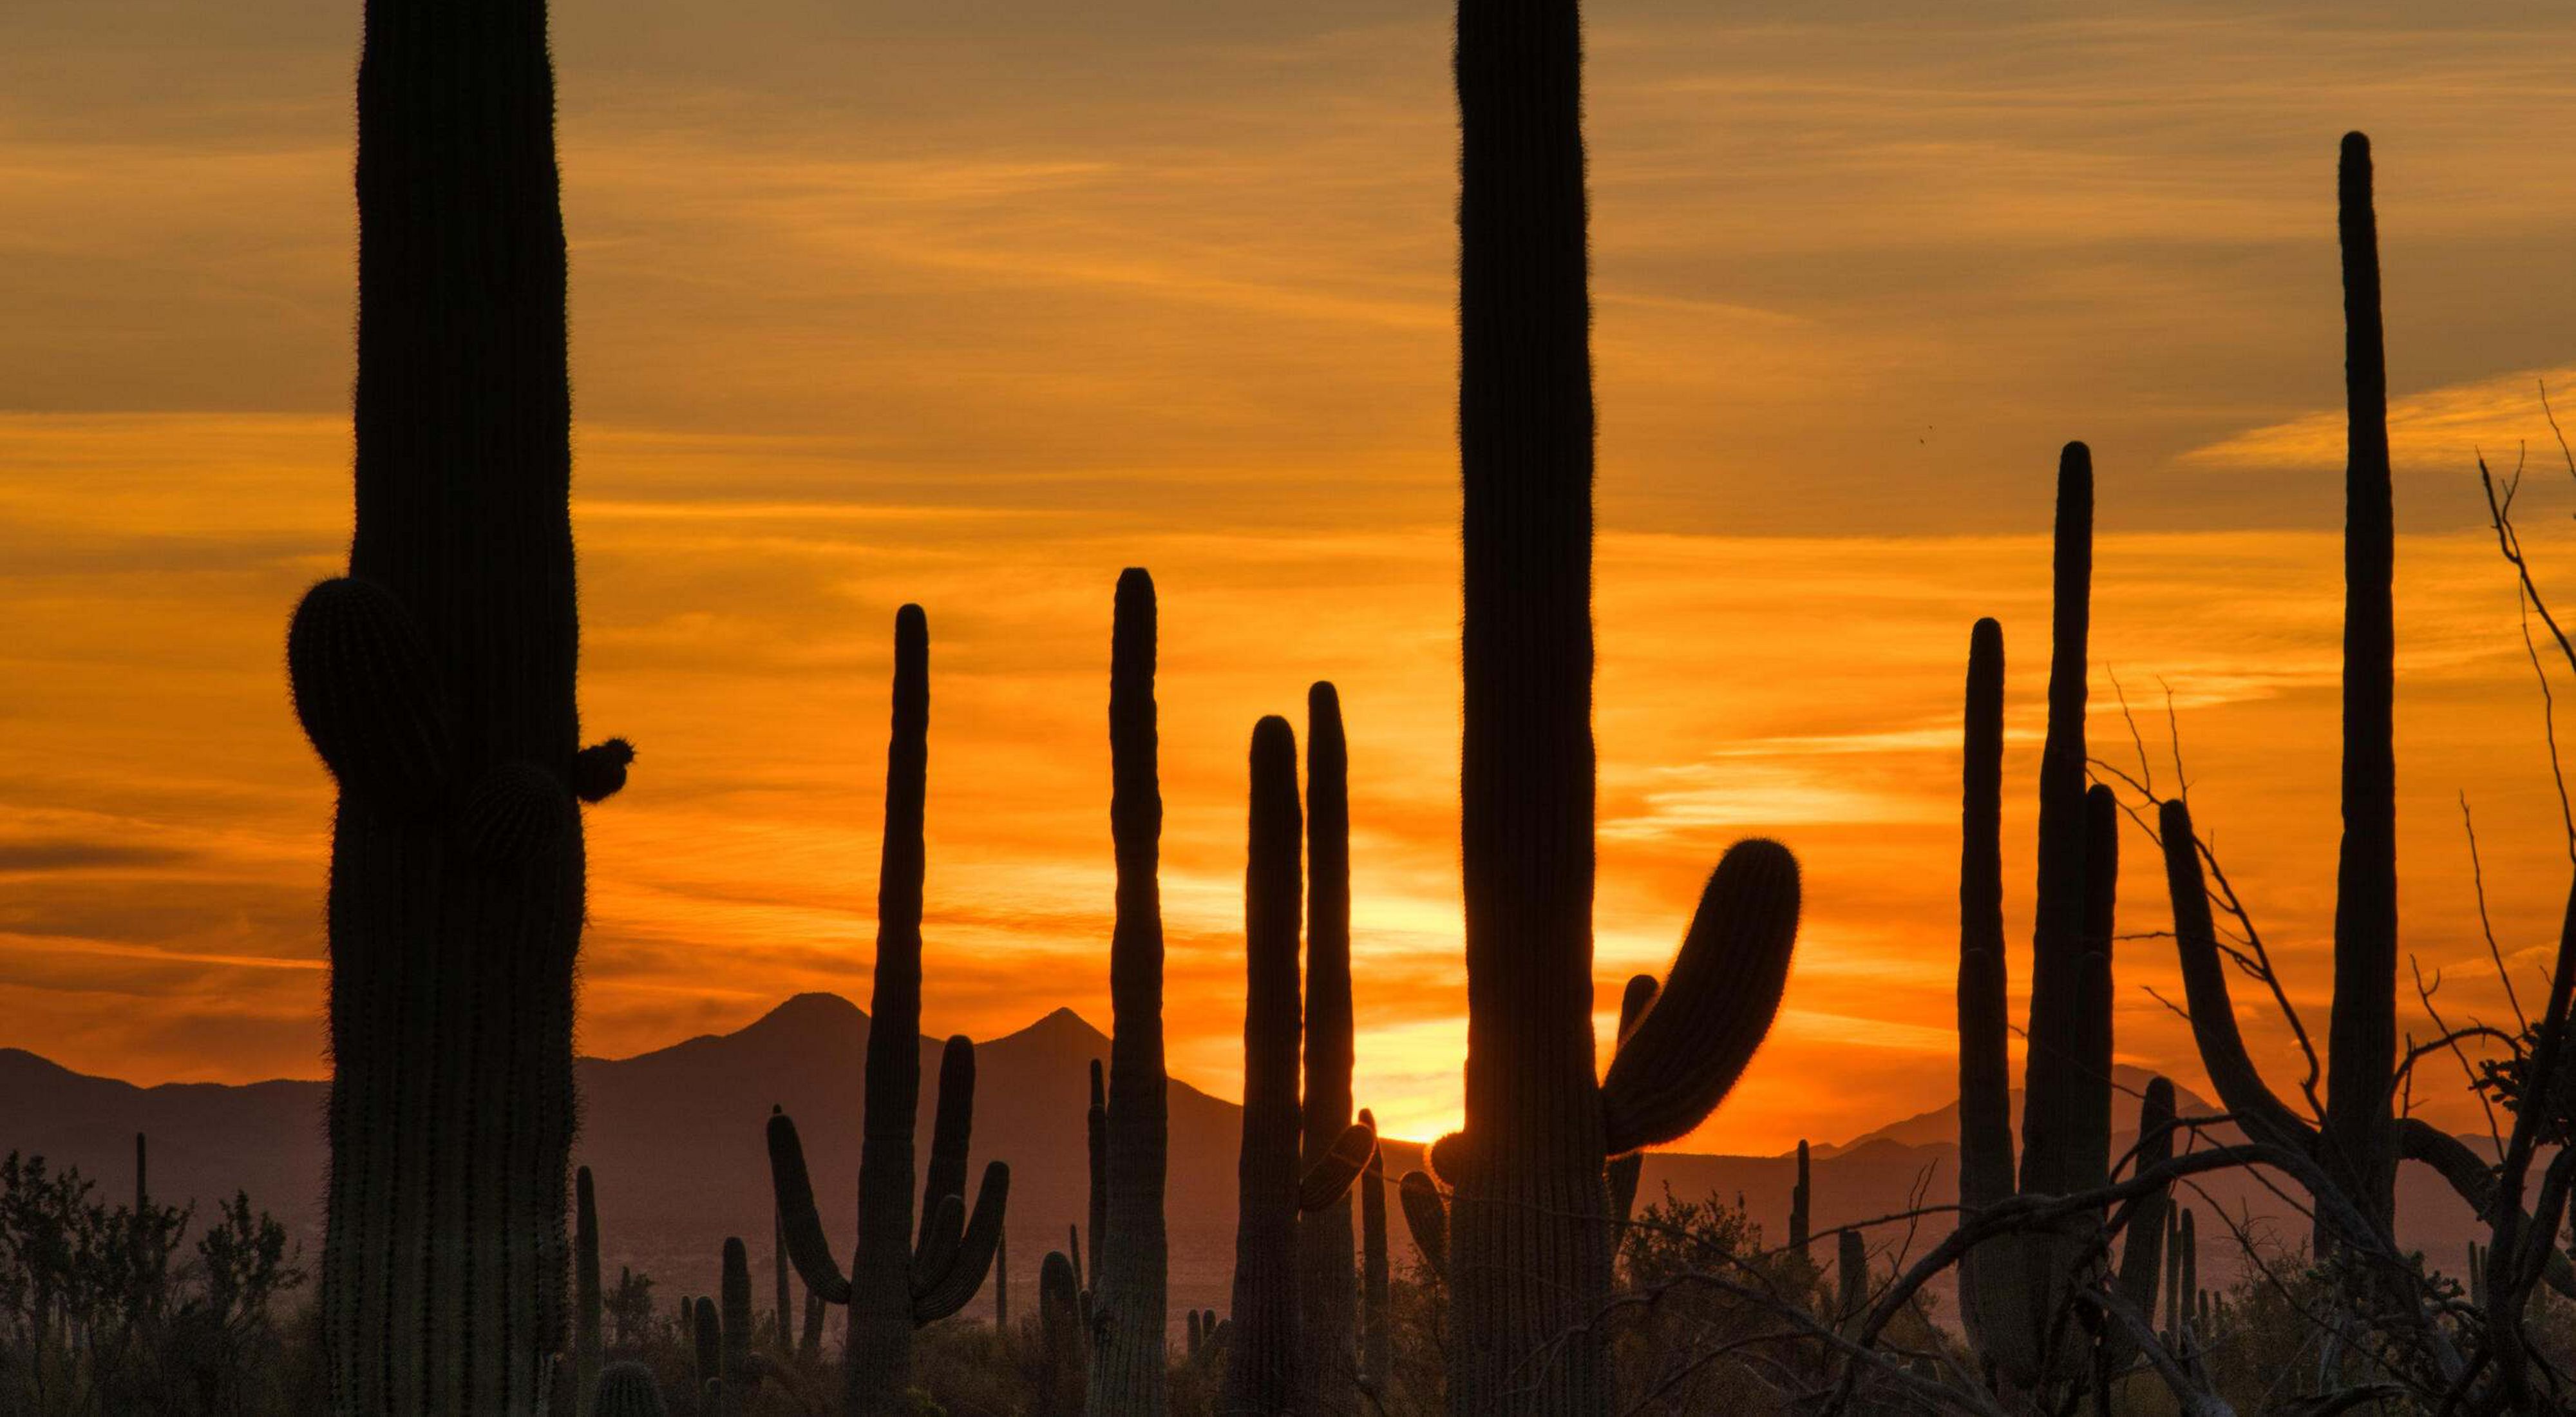 Saguaro cacti obstruct the view of a glowing orange sunset.